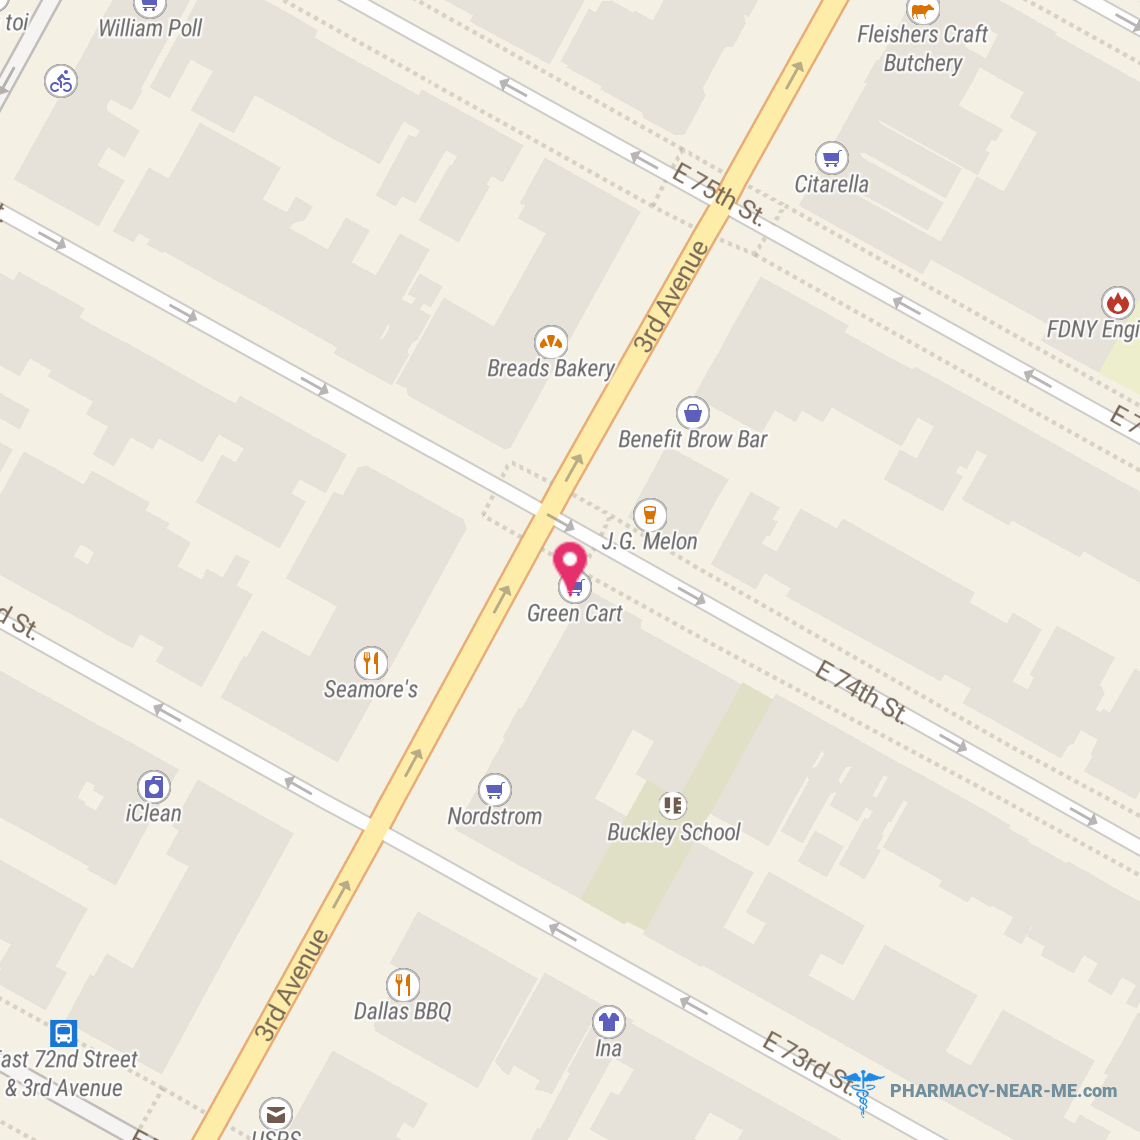 DUANE READE #14151 - Pharmacy Hours, Phone, Reviews & Information: 1279 3rd Avenue, NY, New York 10021, United States